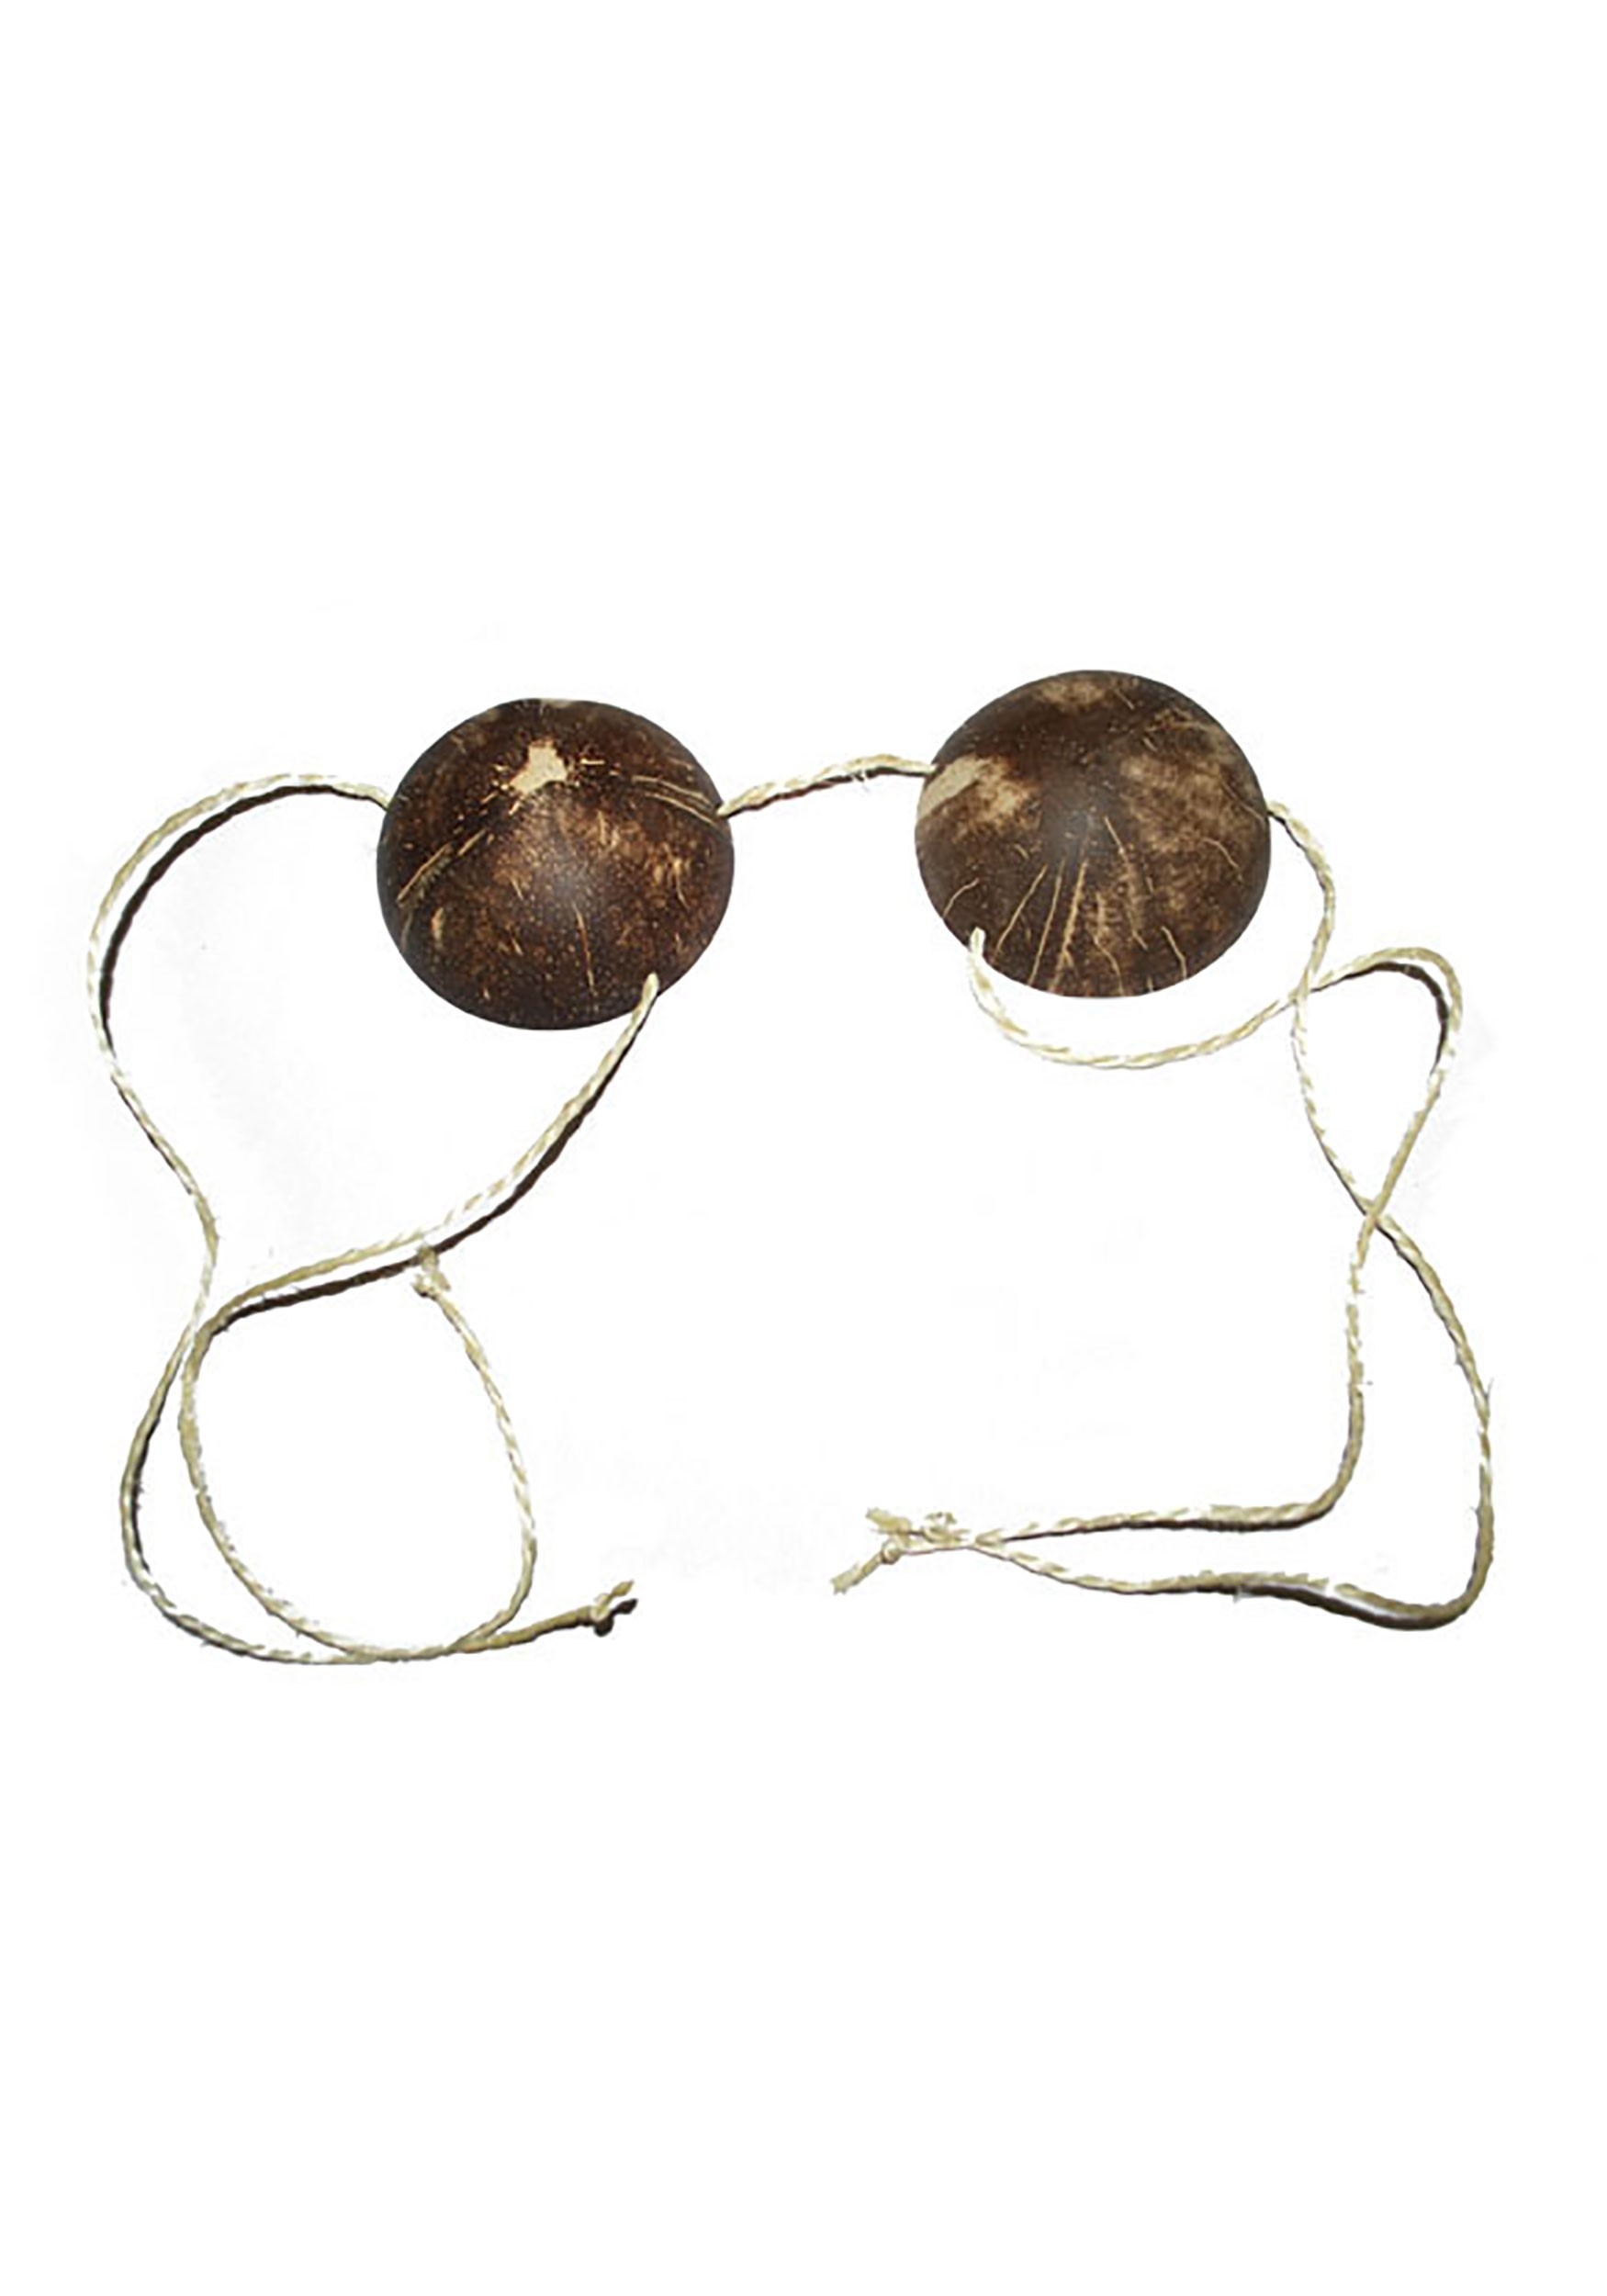 https://images.halloweencostumes.eu/products/60034/1-1/real-coconut-bra.jpg